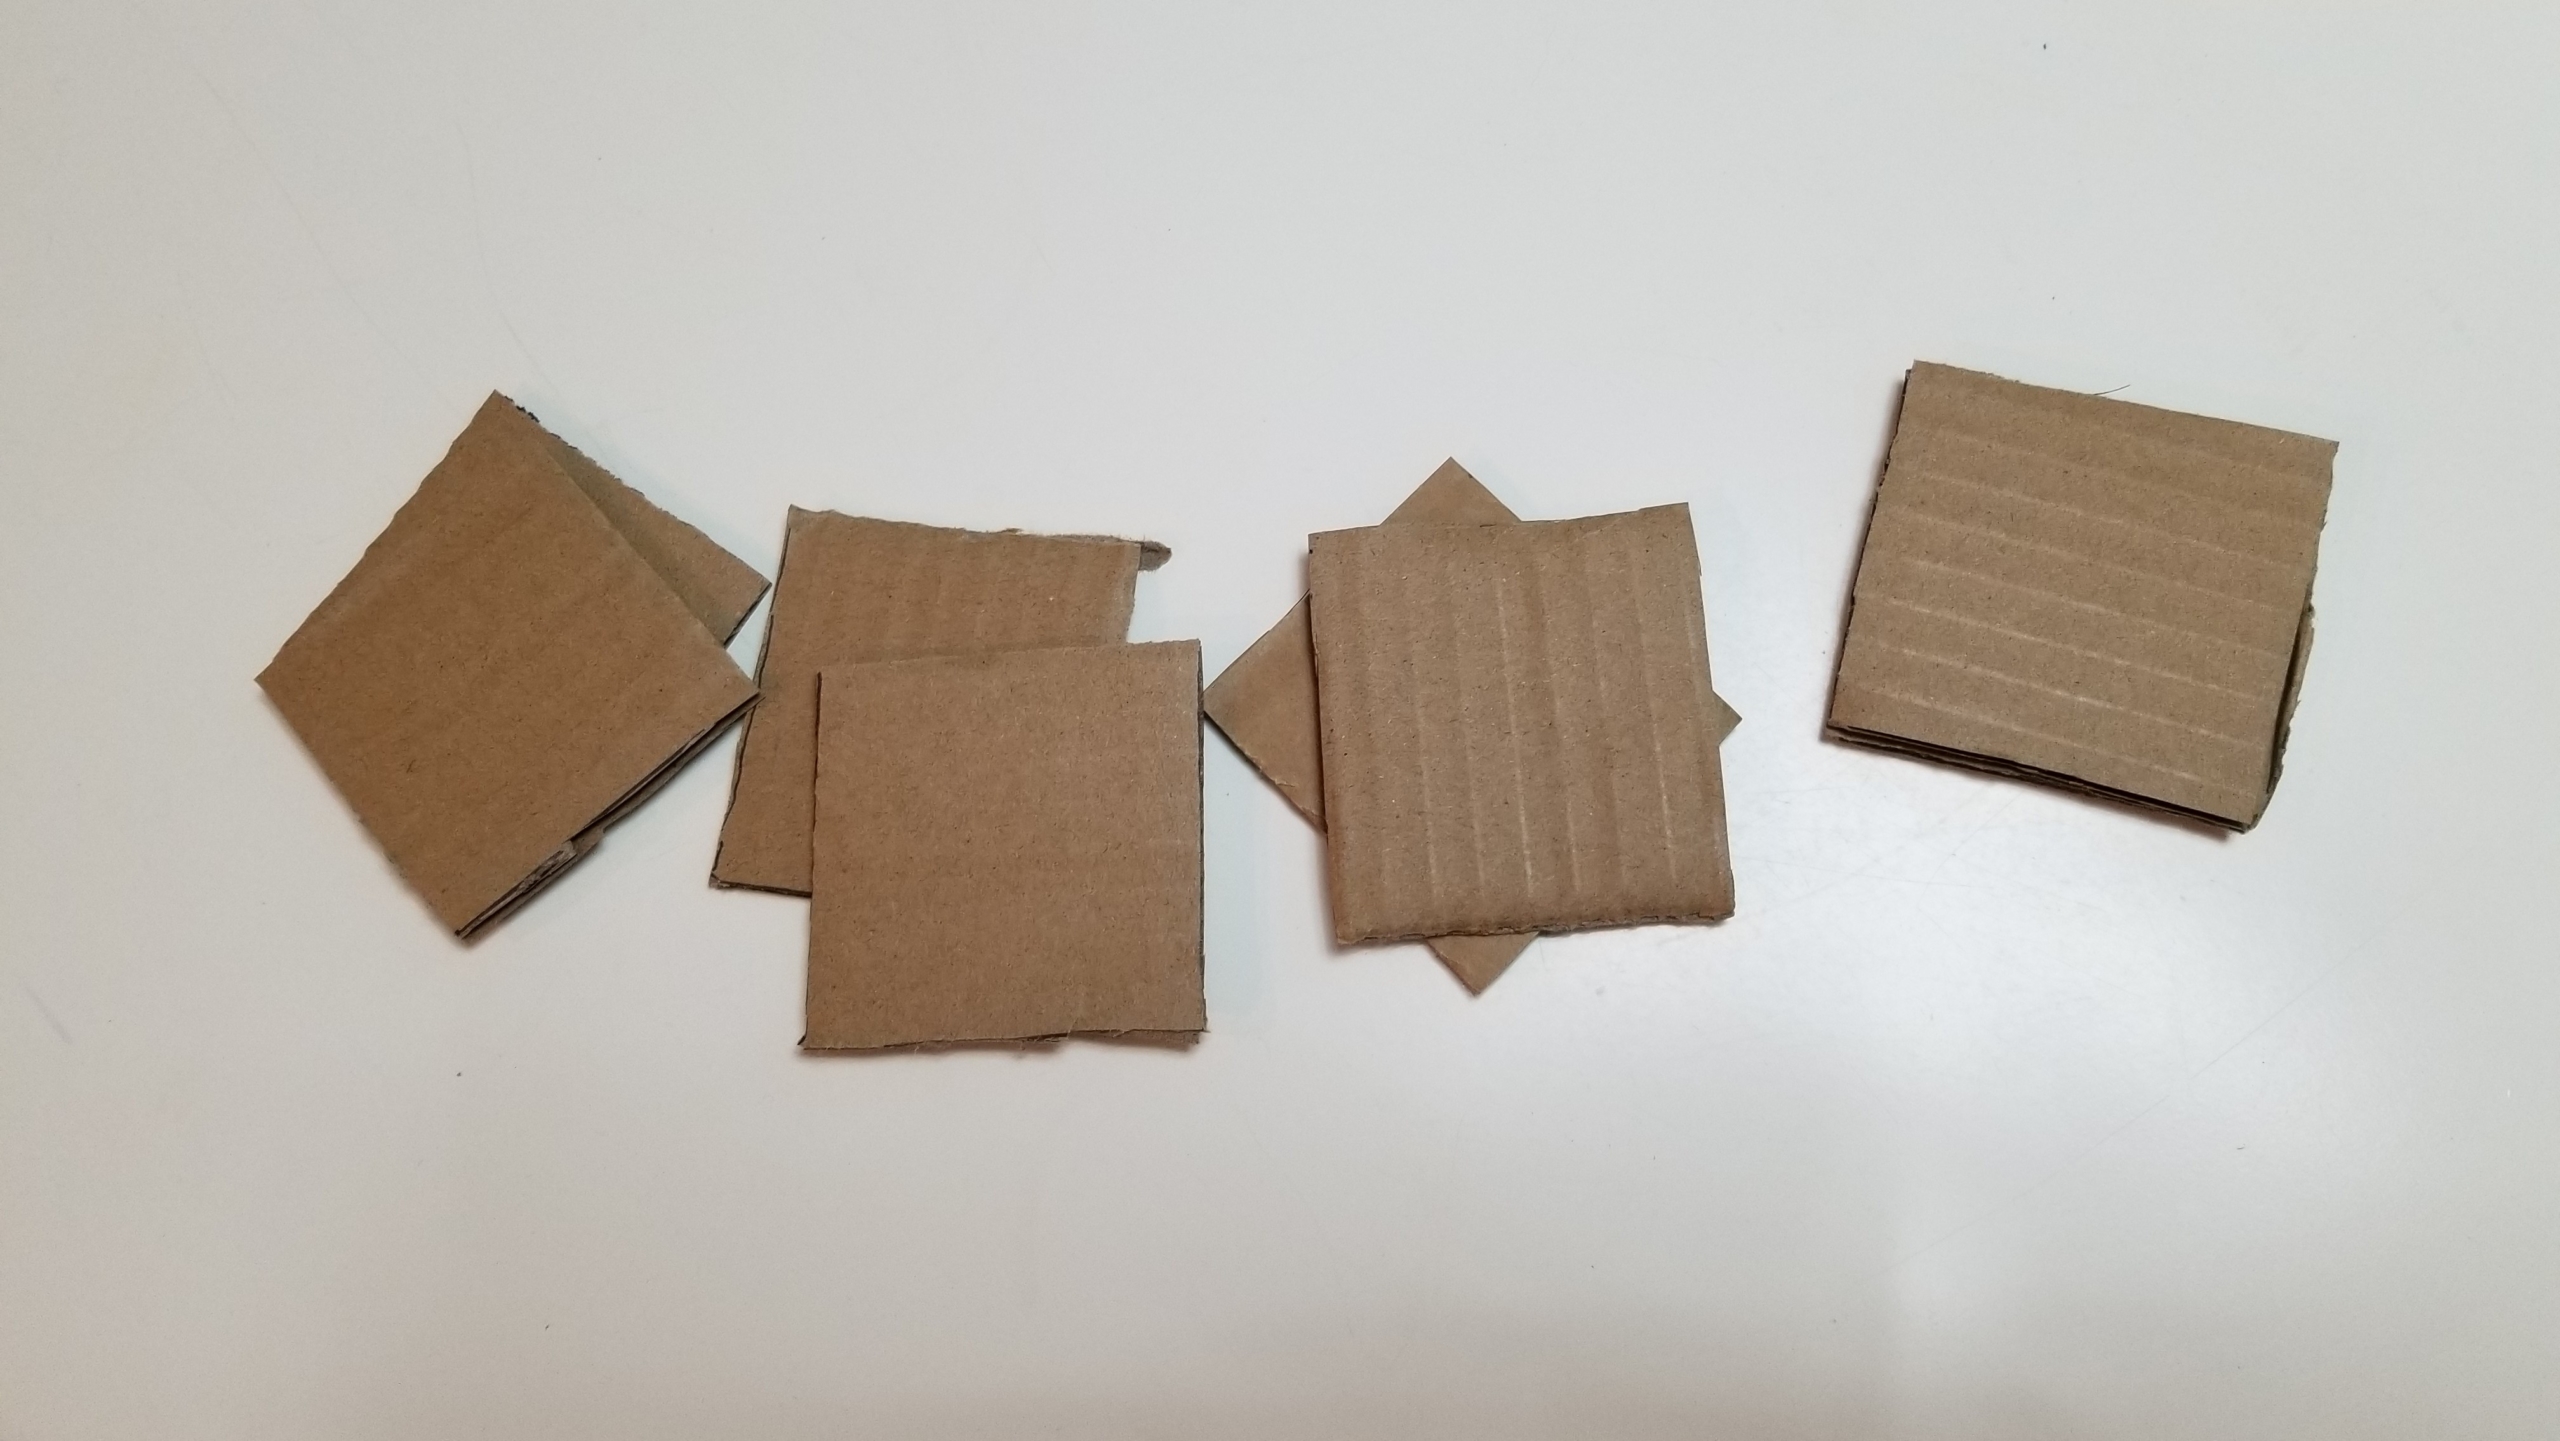 pieces of cardboard cut into squares